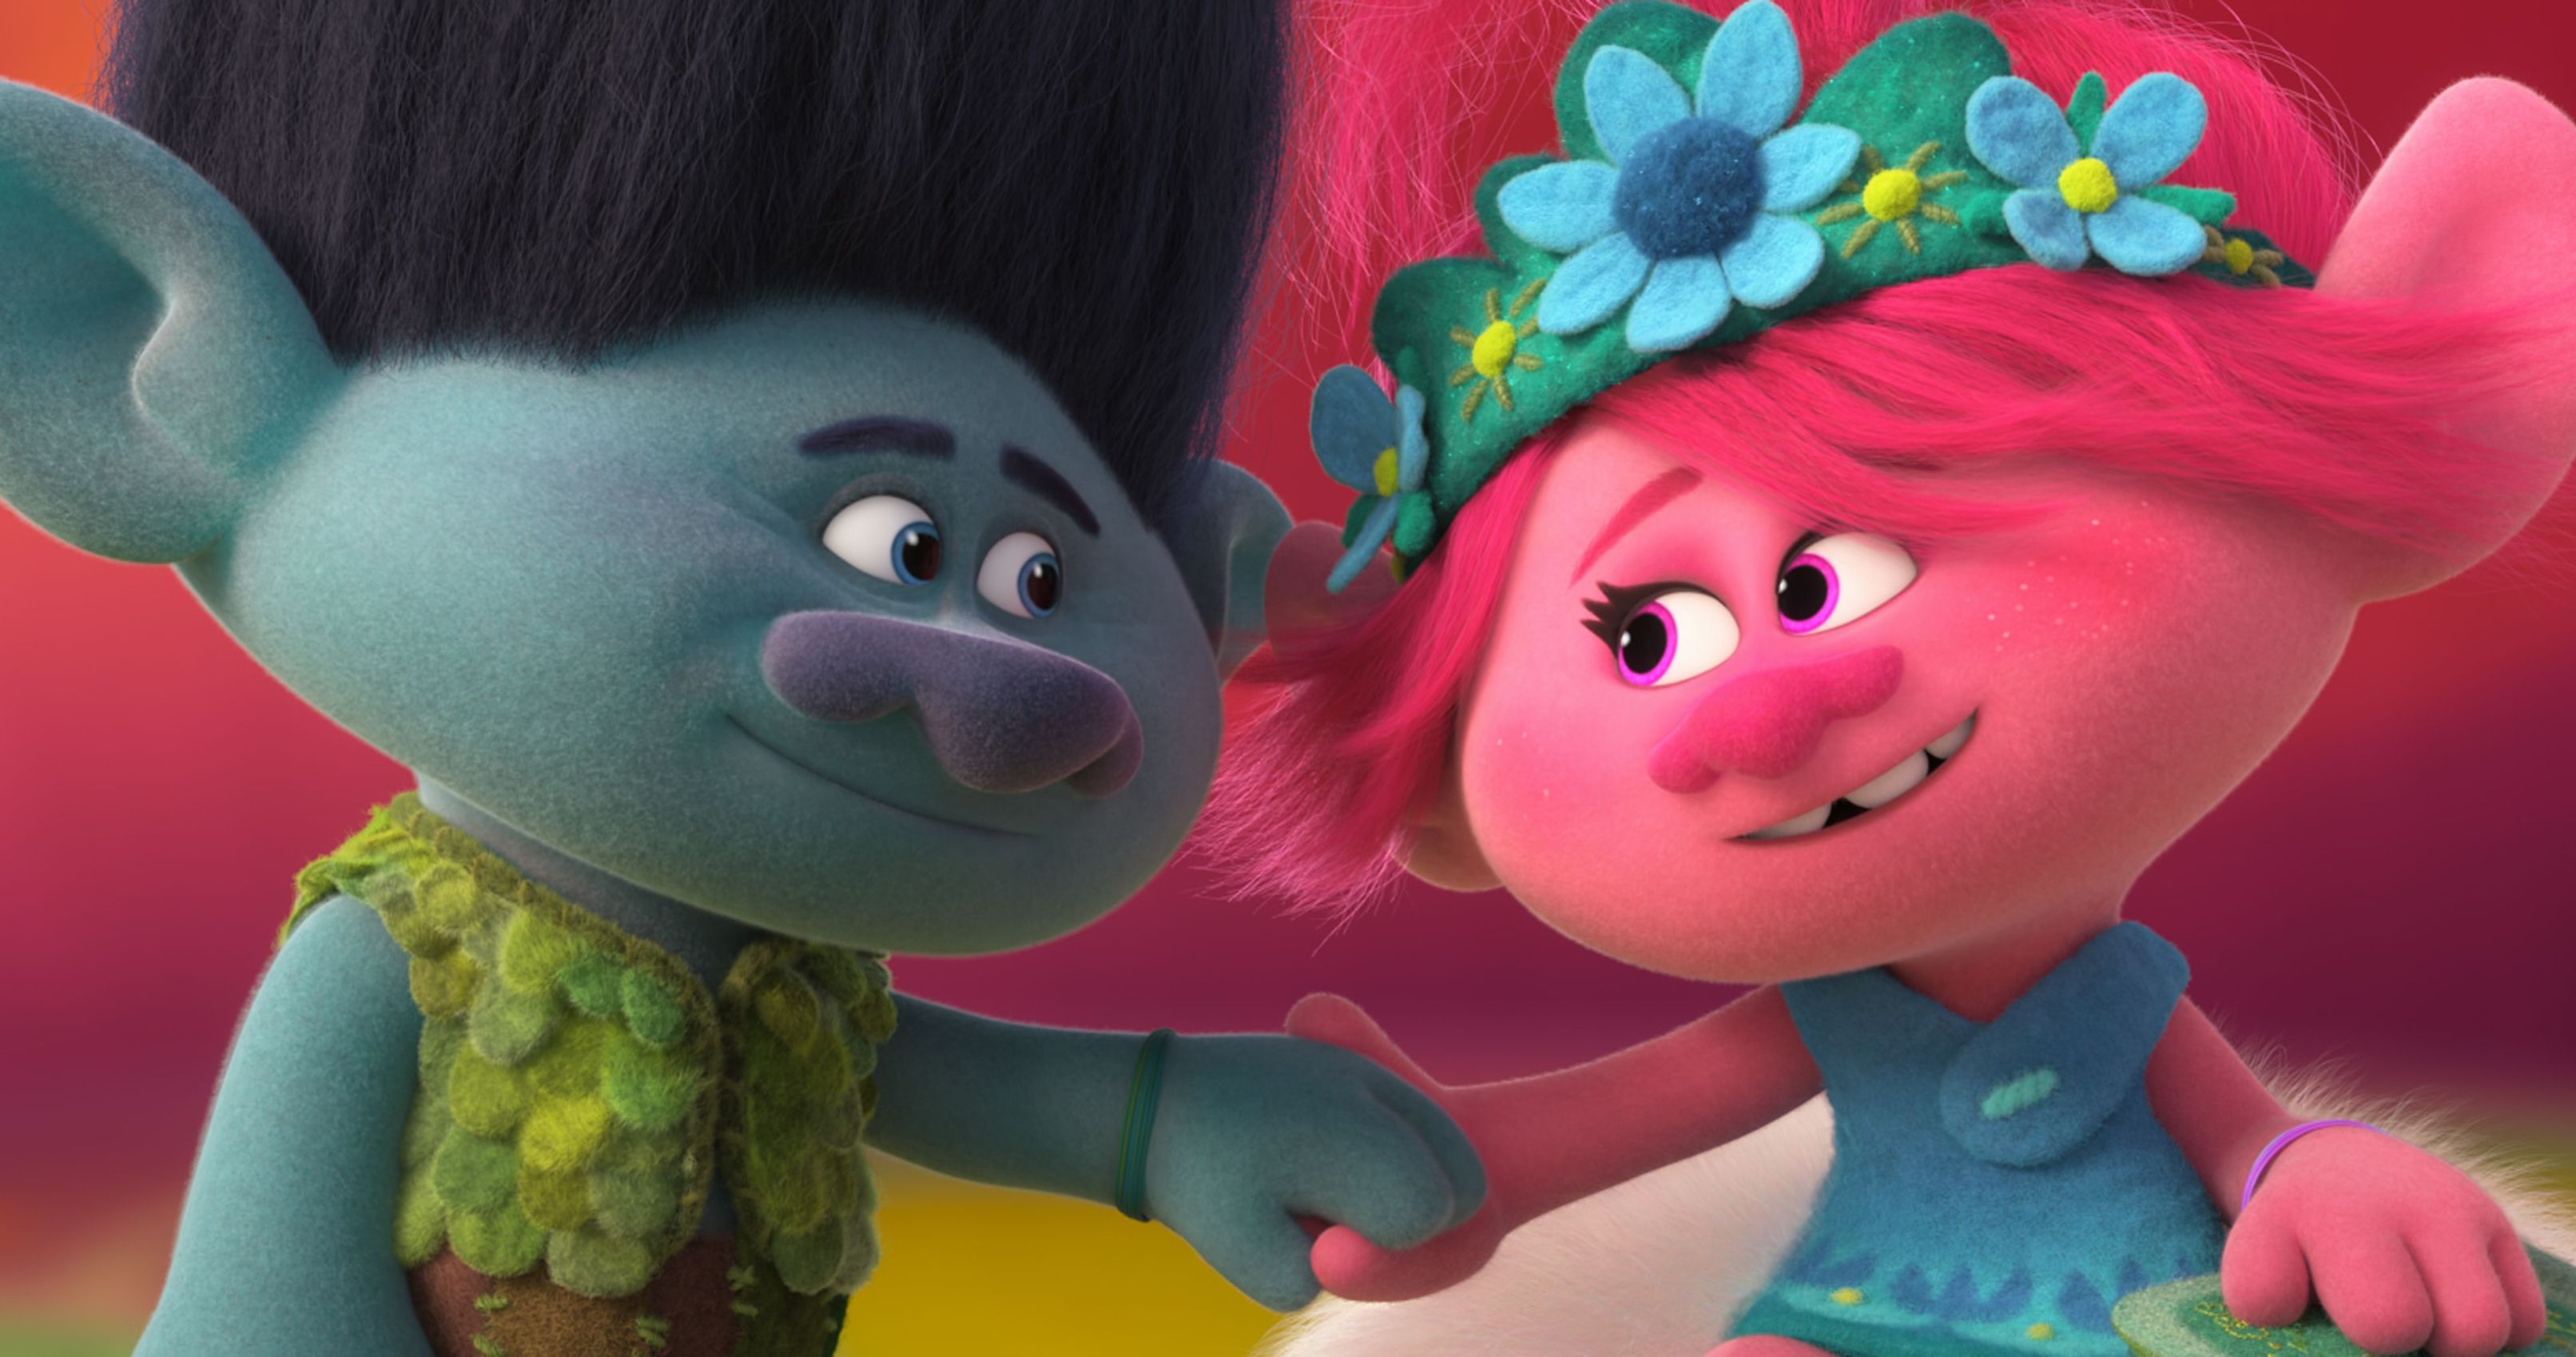 AMC Theatres Refuses to Show Universal Movies After Trolls World Tour Disagreement